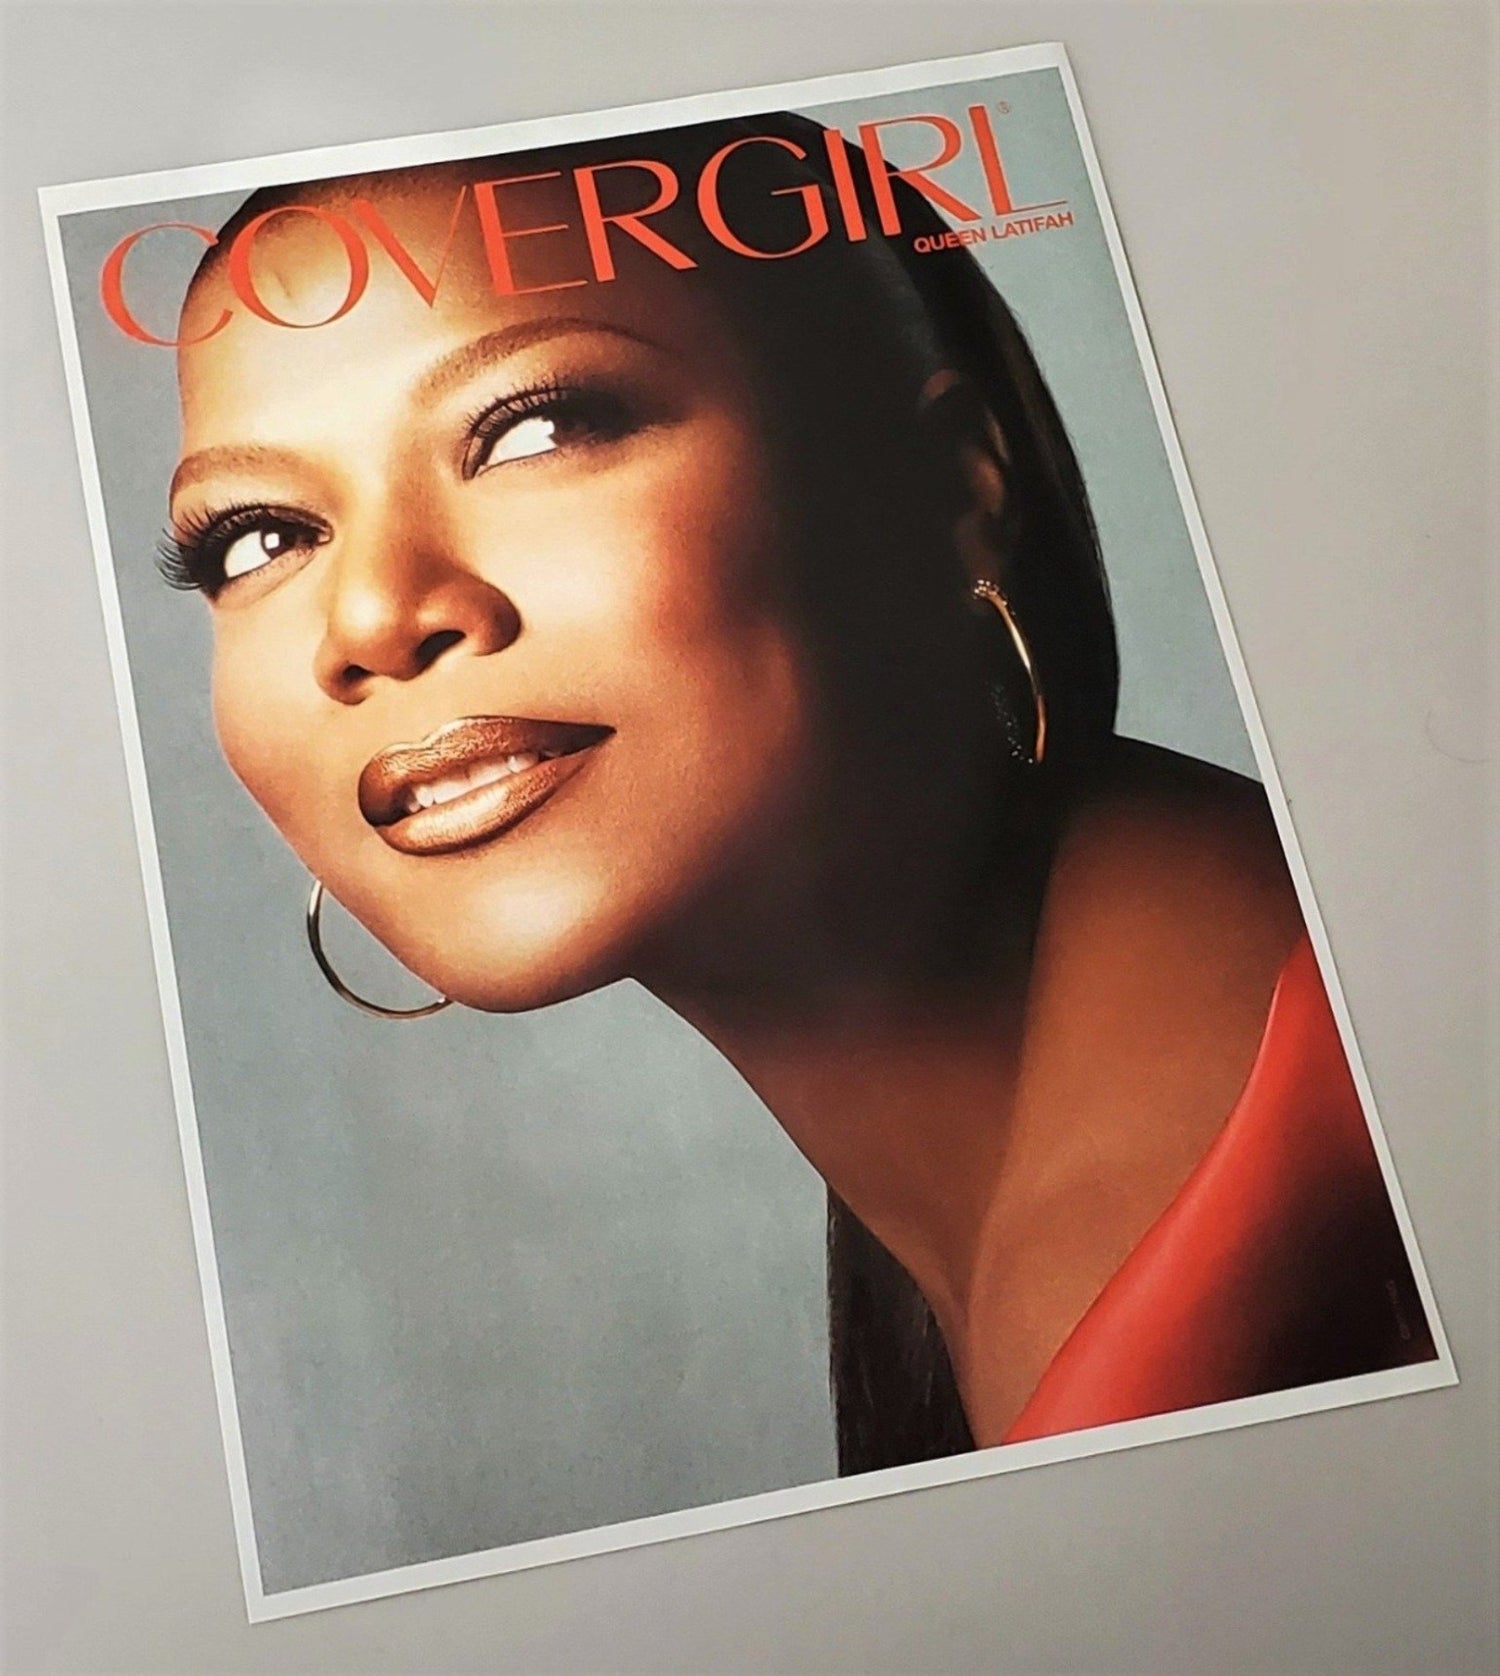 Original 2012 Queen Latifah for Covergirl advertisement page available in area51gallery